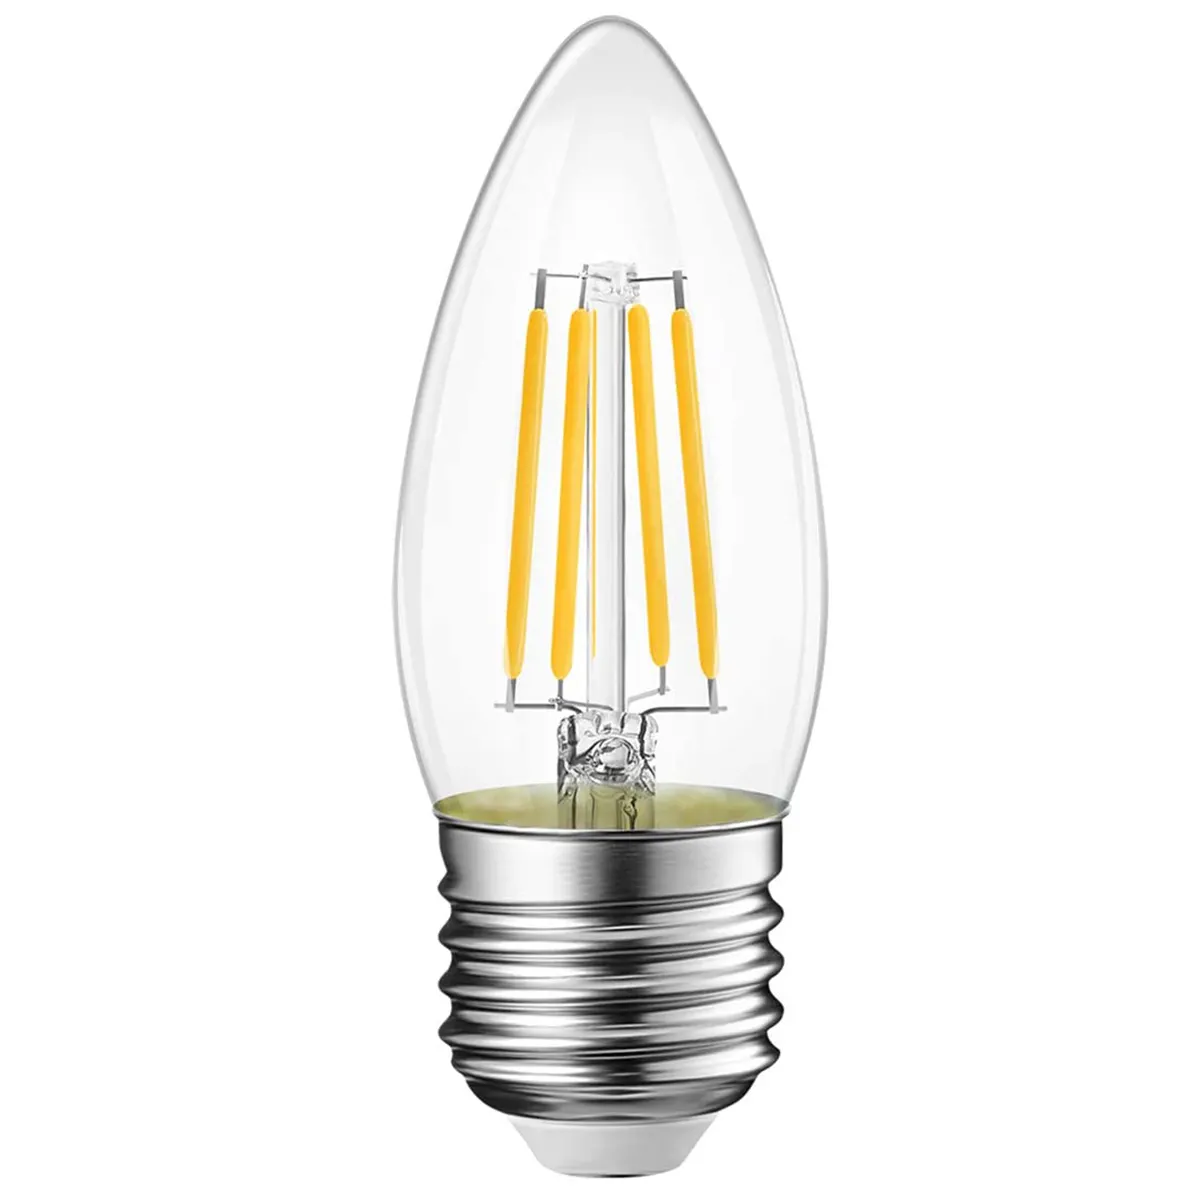 Factory price C35 E26 60W dimmable candle bulb, Flicker free vintage edison C35 led filament